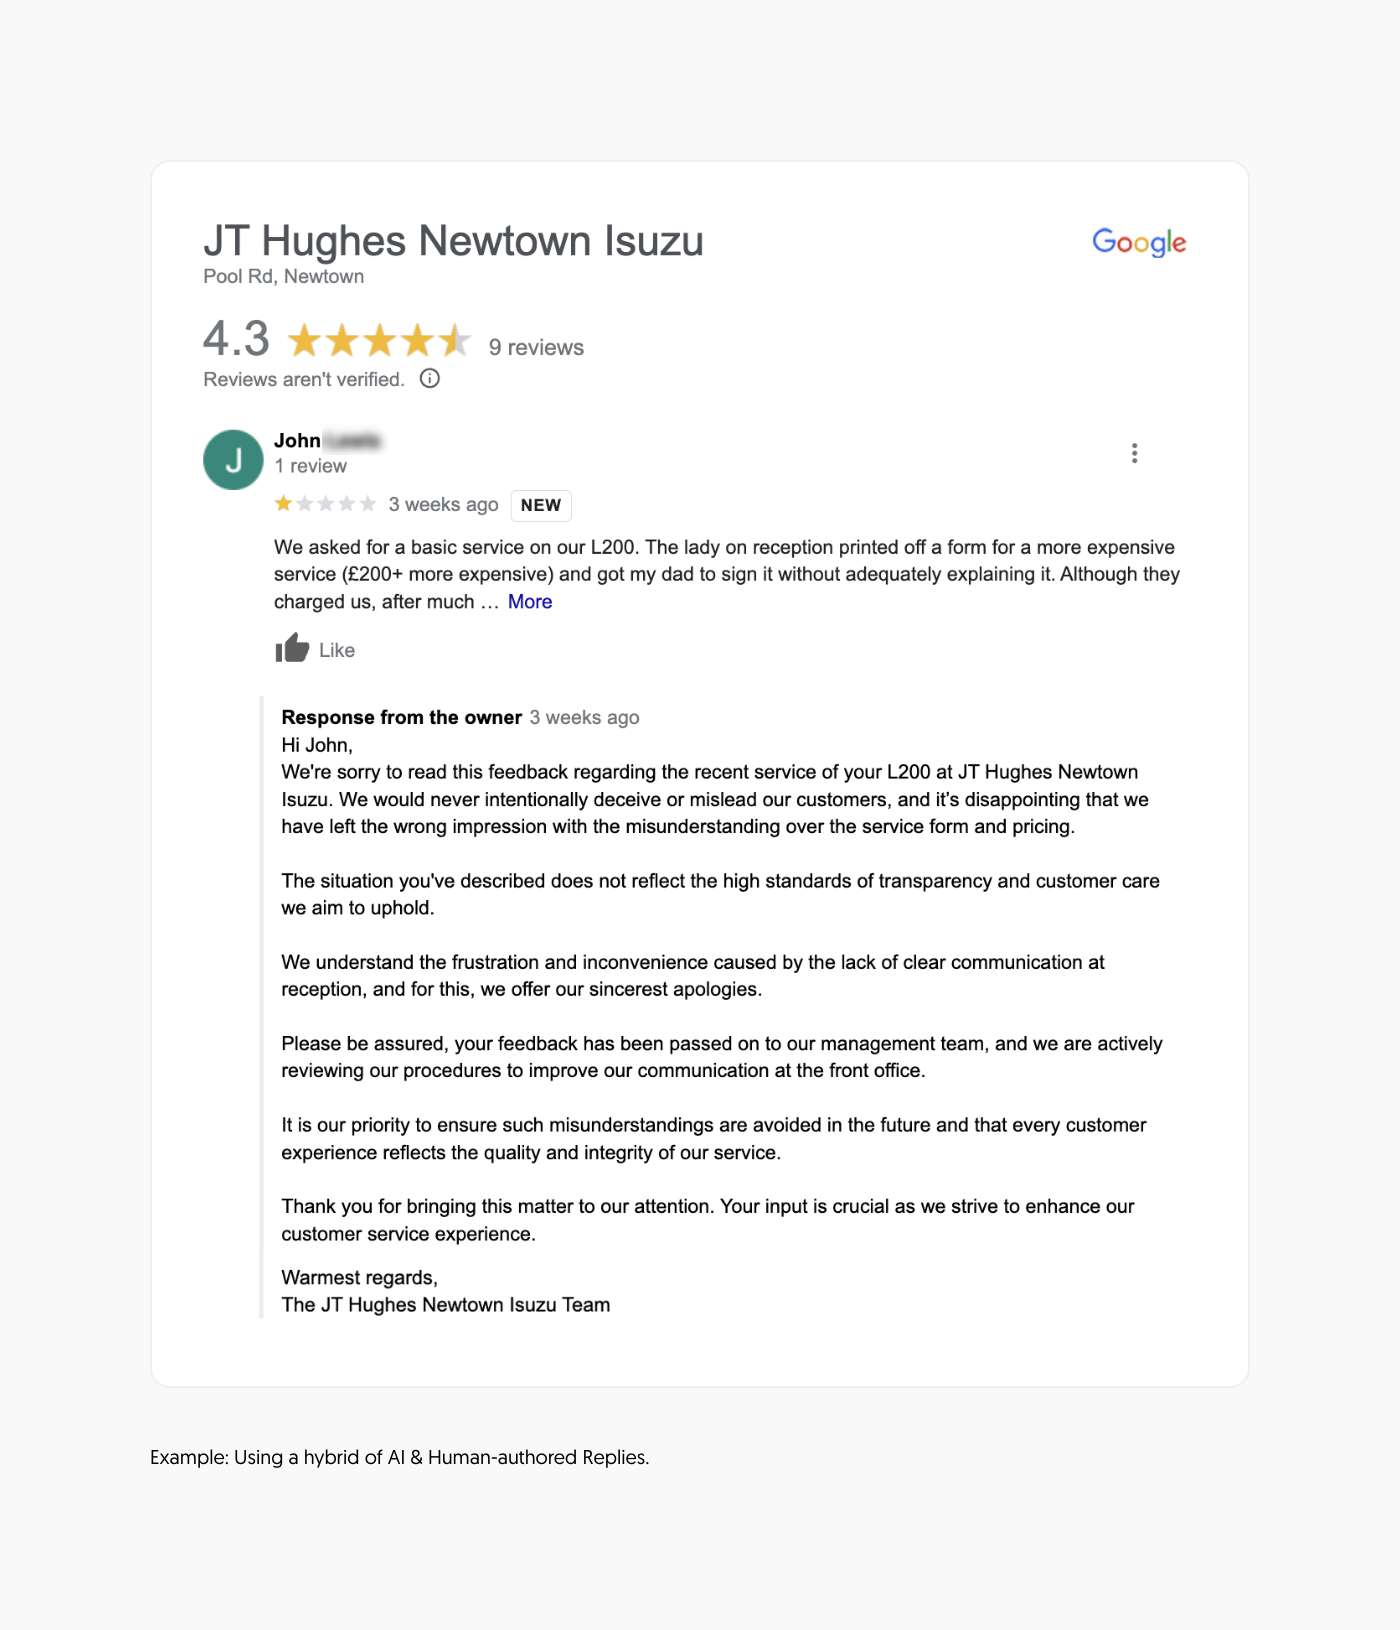 Negative Review with AI & Human Authored Response